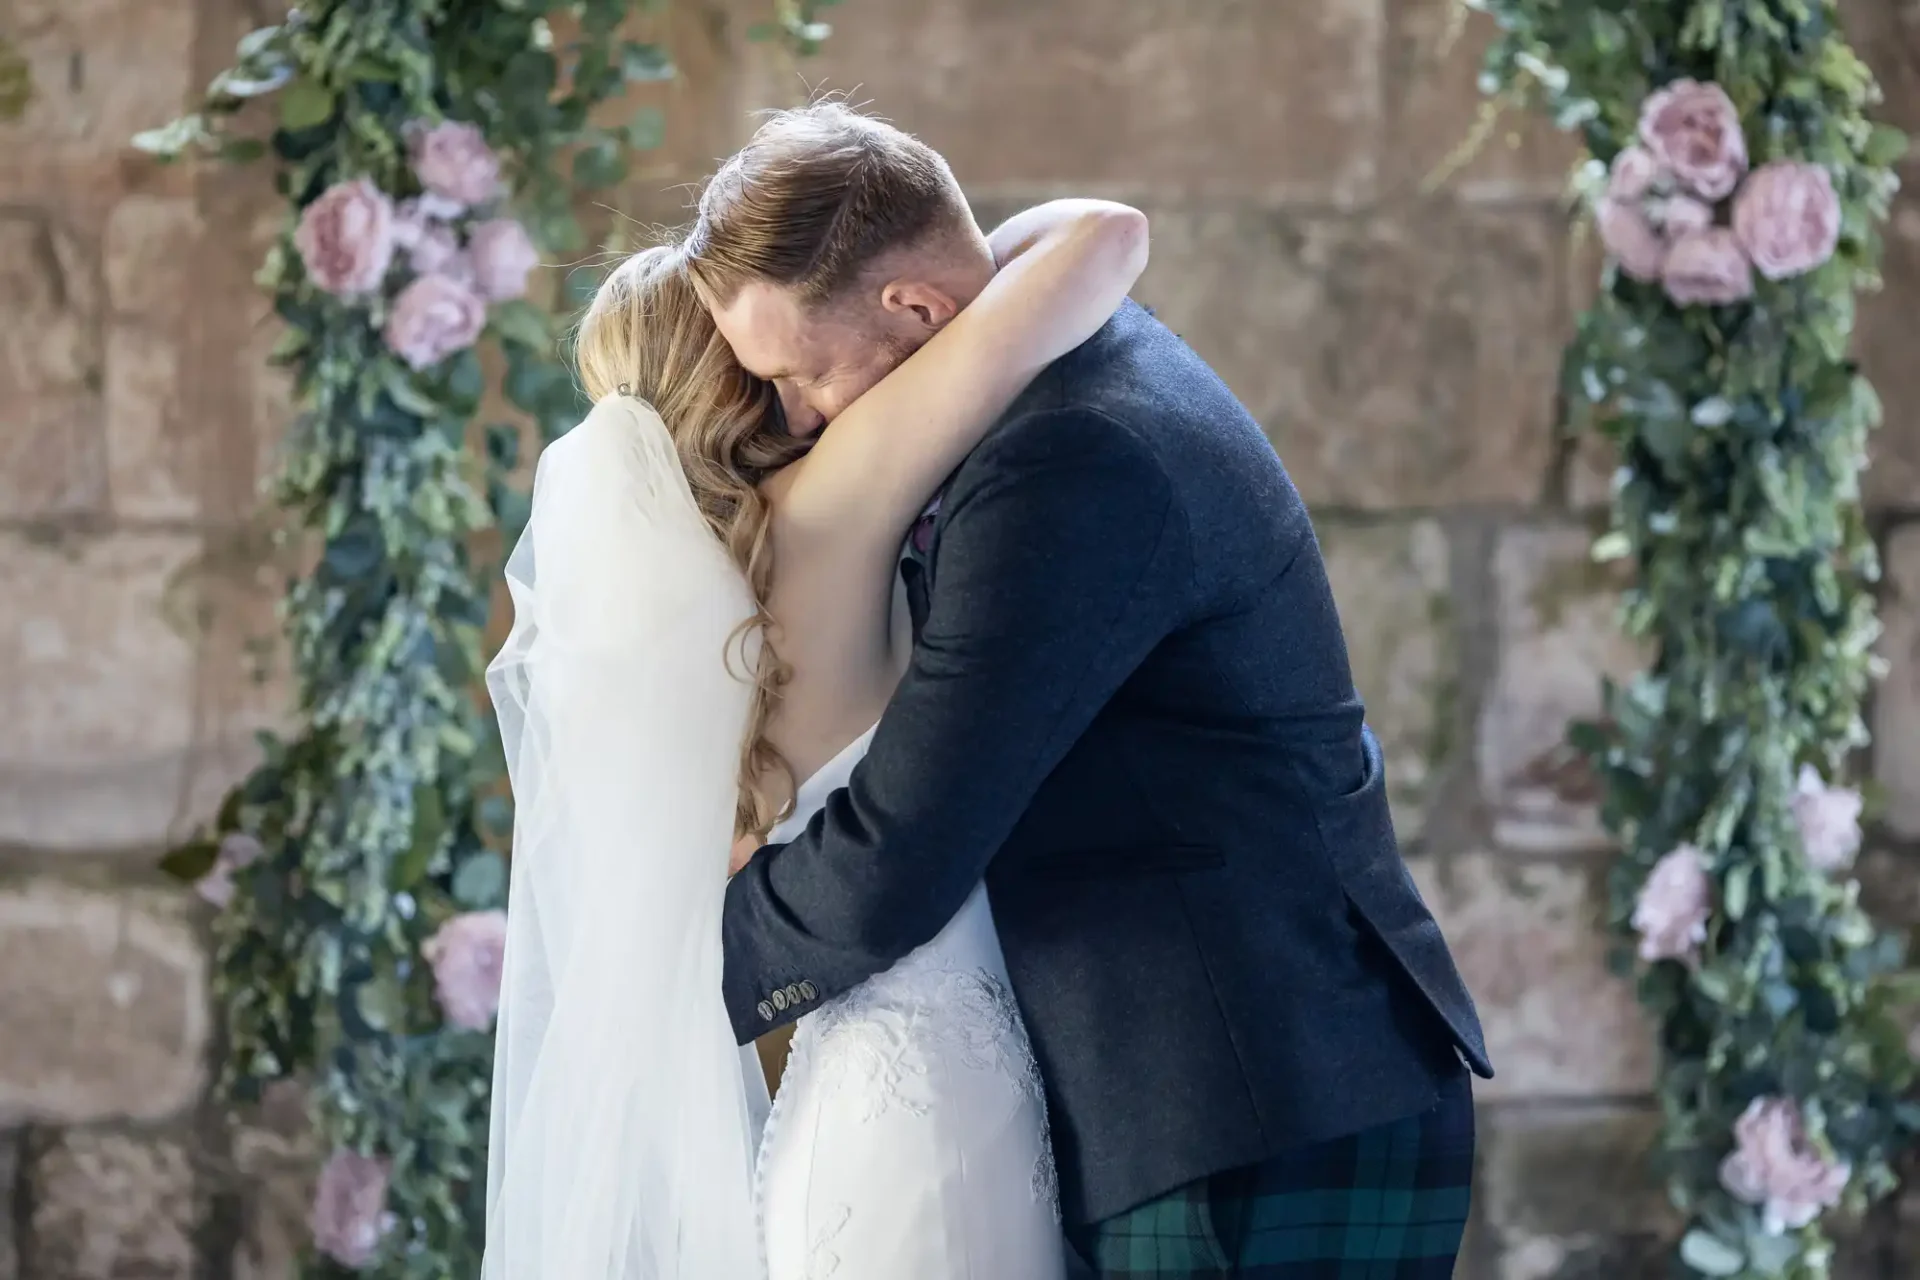 A bride and groom embracing at their wedding, the groom wearing a kilt, surrounded by floral decorations in a stone building.